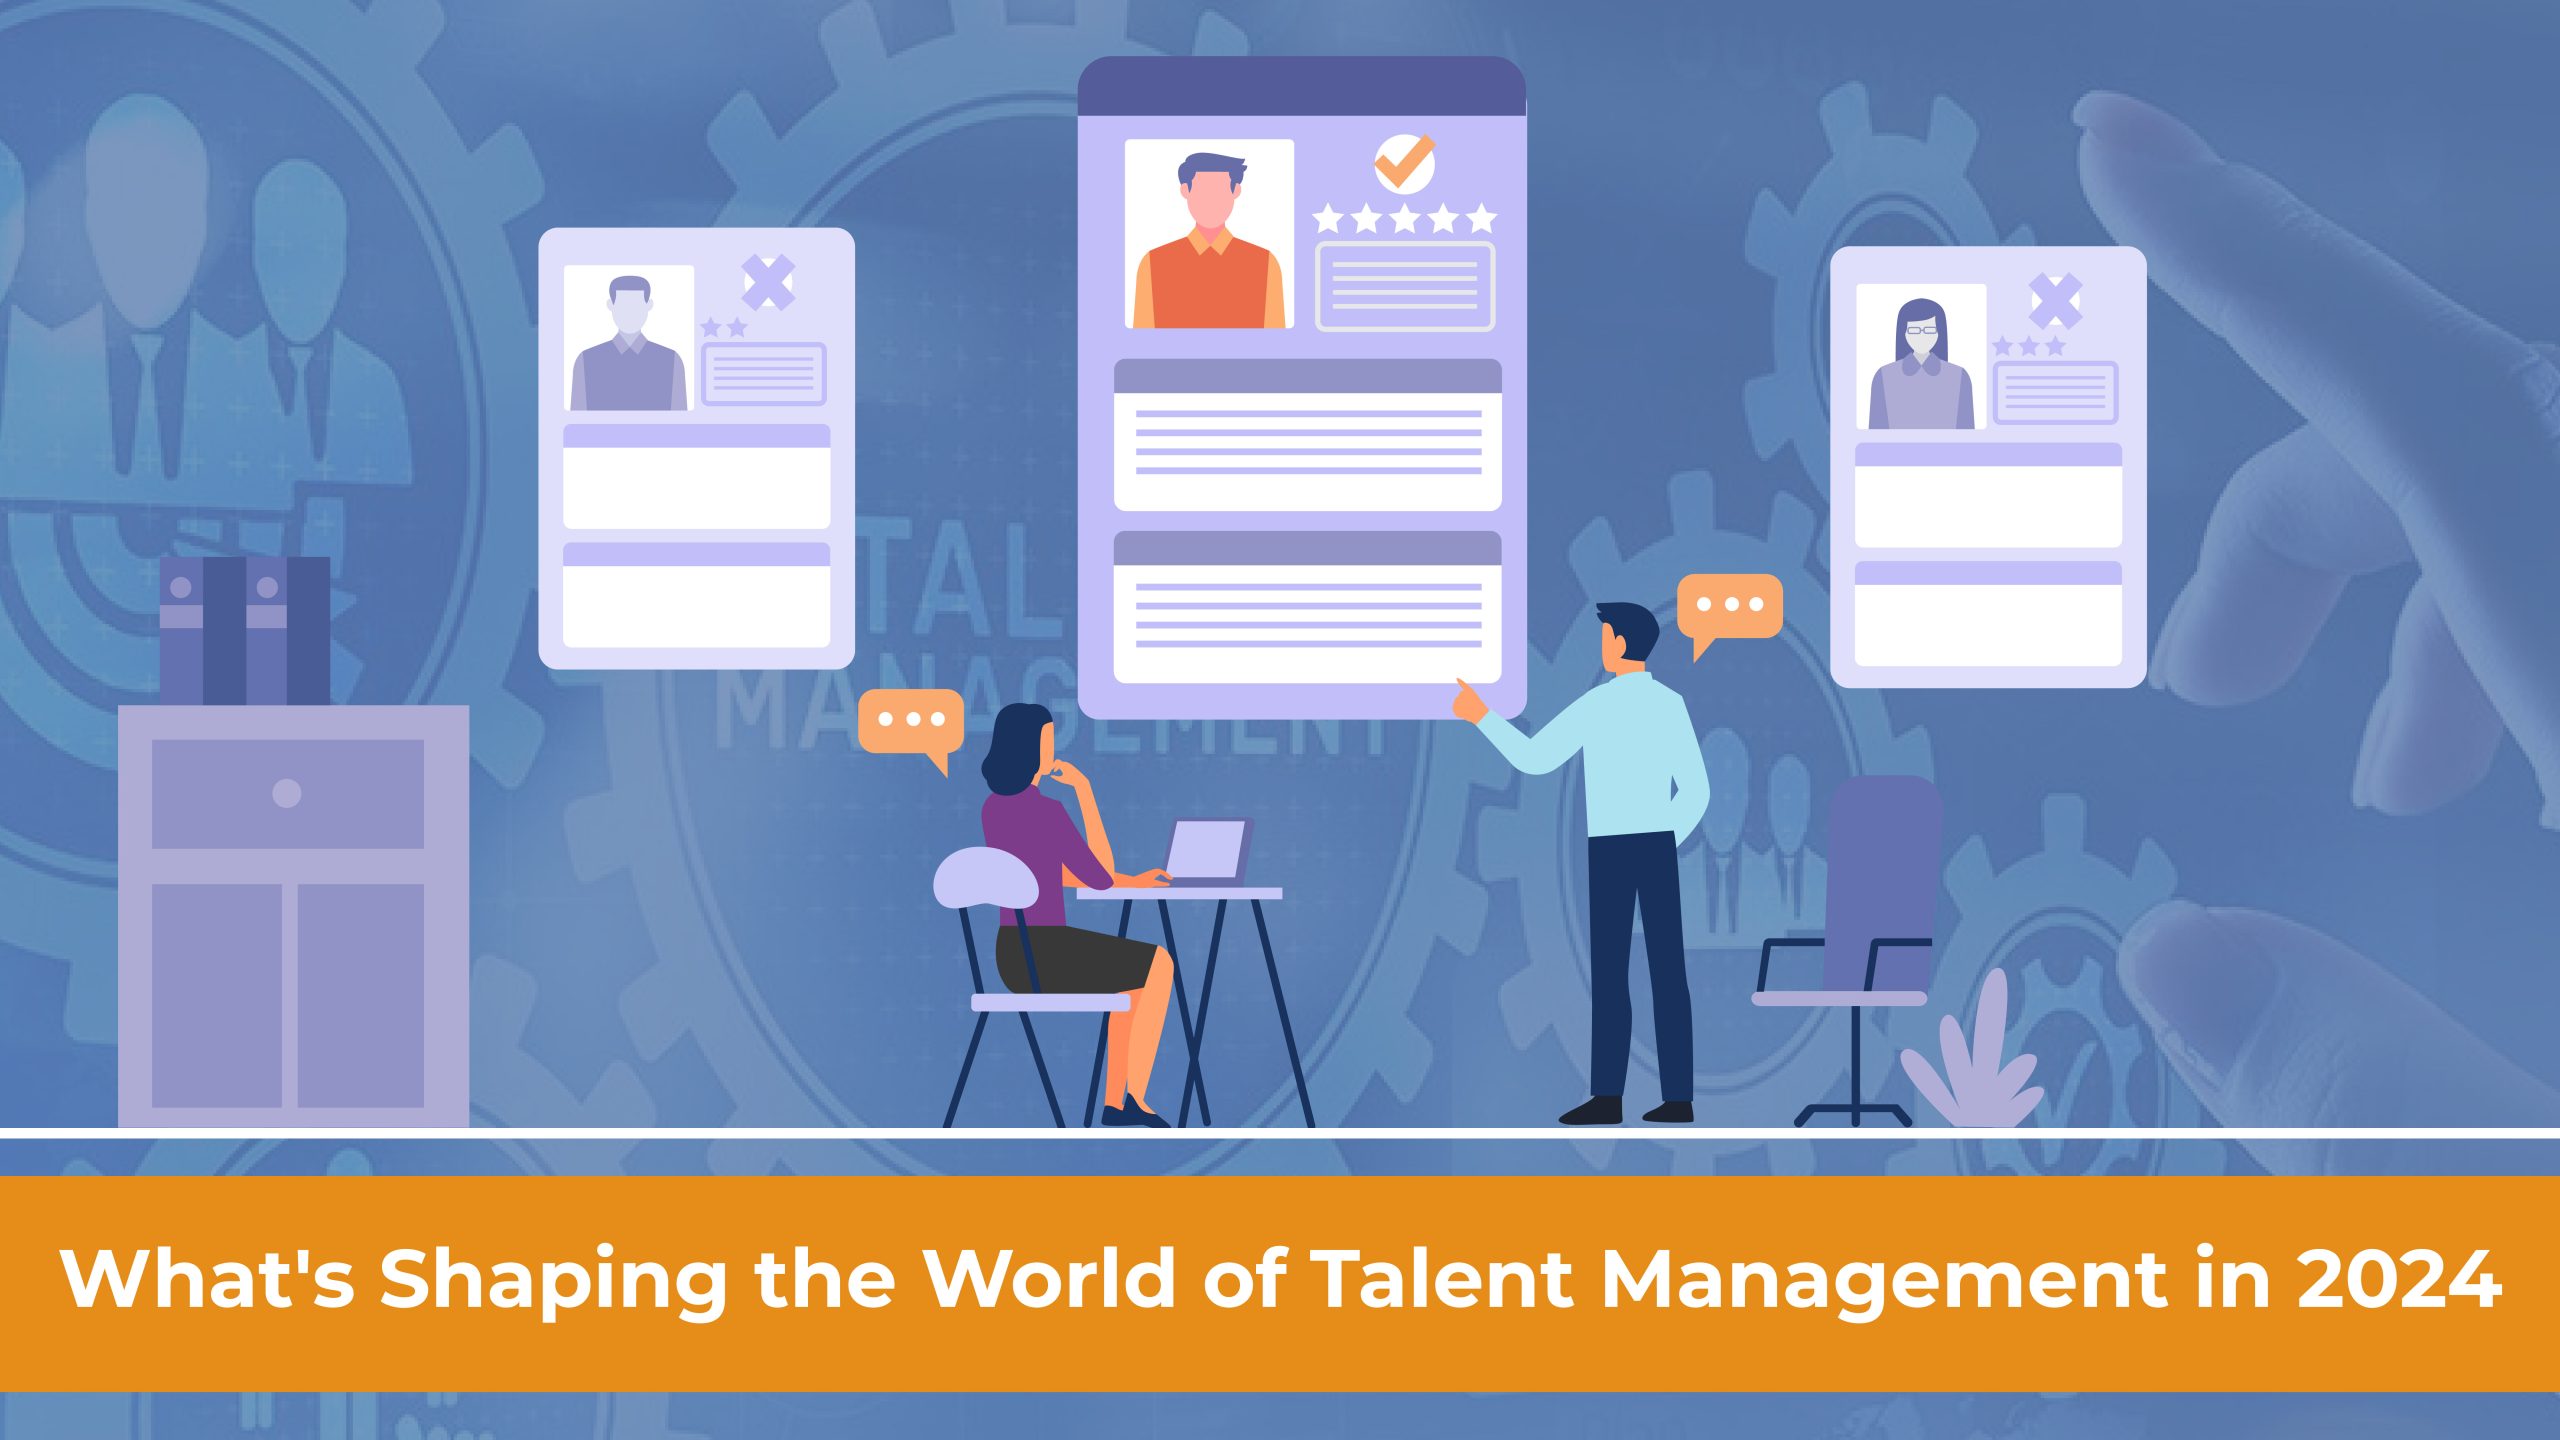 What's Shaping the World of Talent Management in 2024